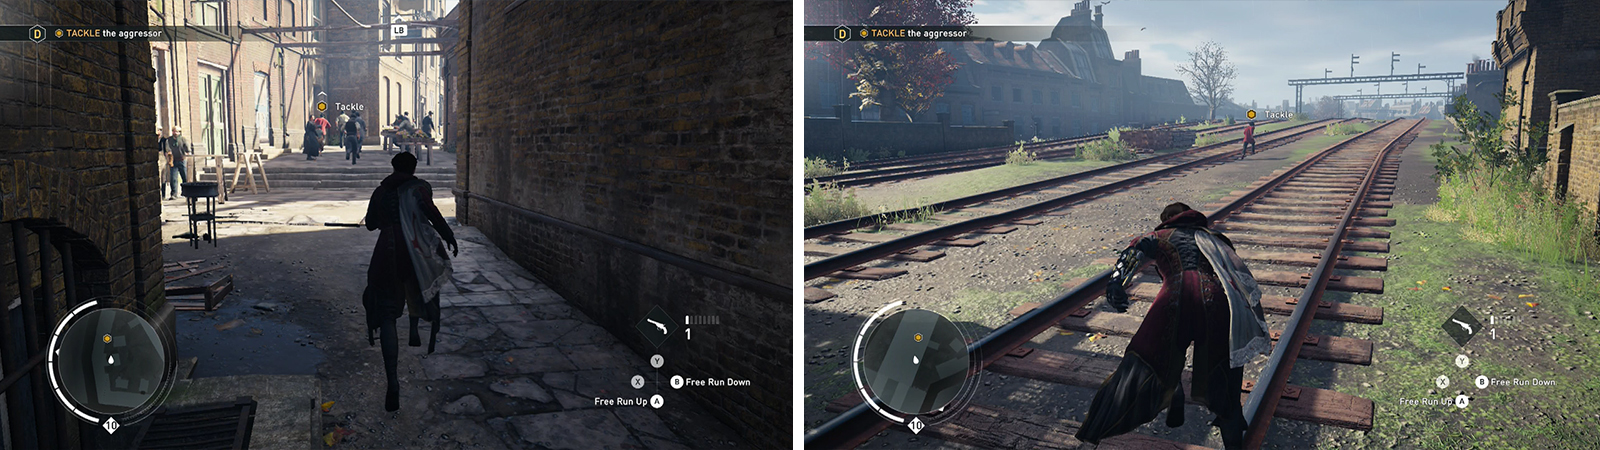 Chase the target through the alleys and streets (left). Tackle him on the train tracks (right) to complete the memory.